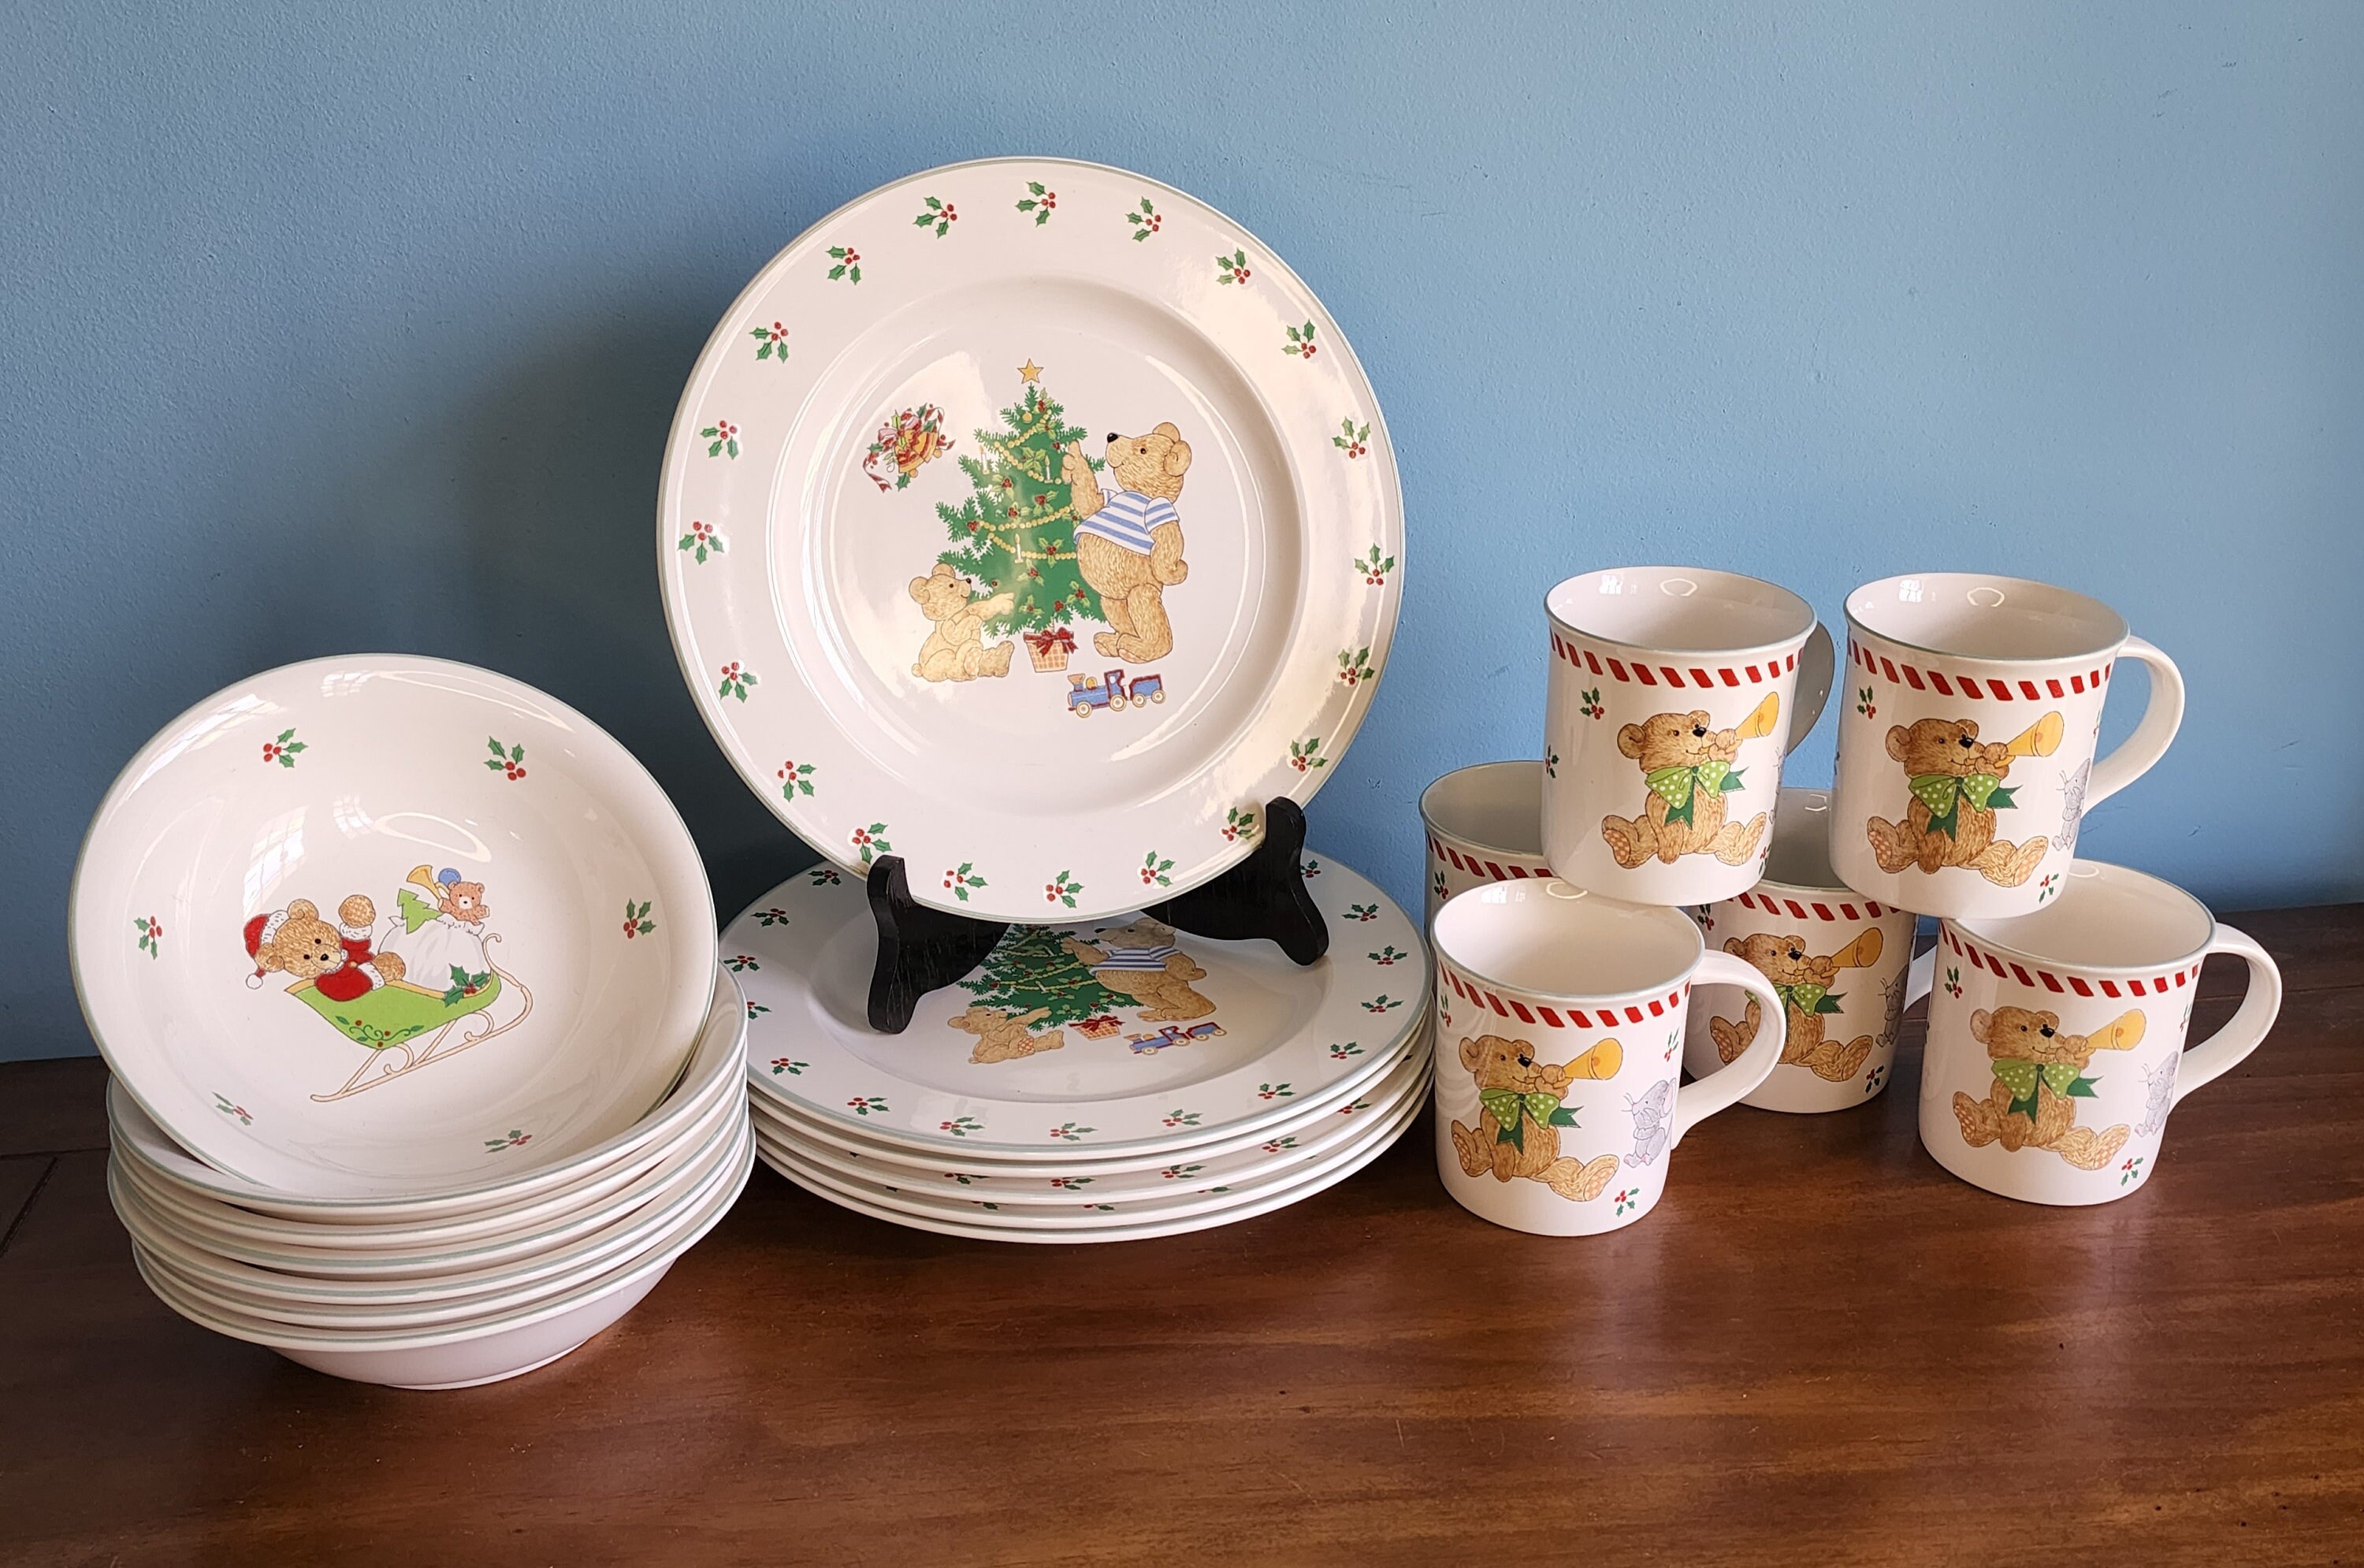 Disney Winnie the Pooh set of Christmas Dishes